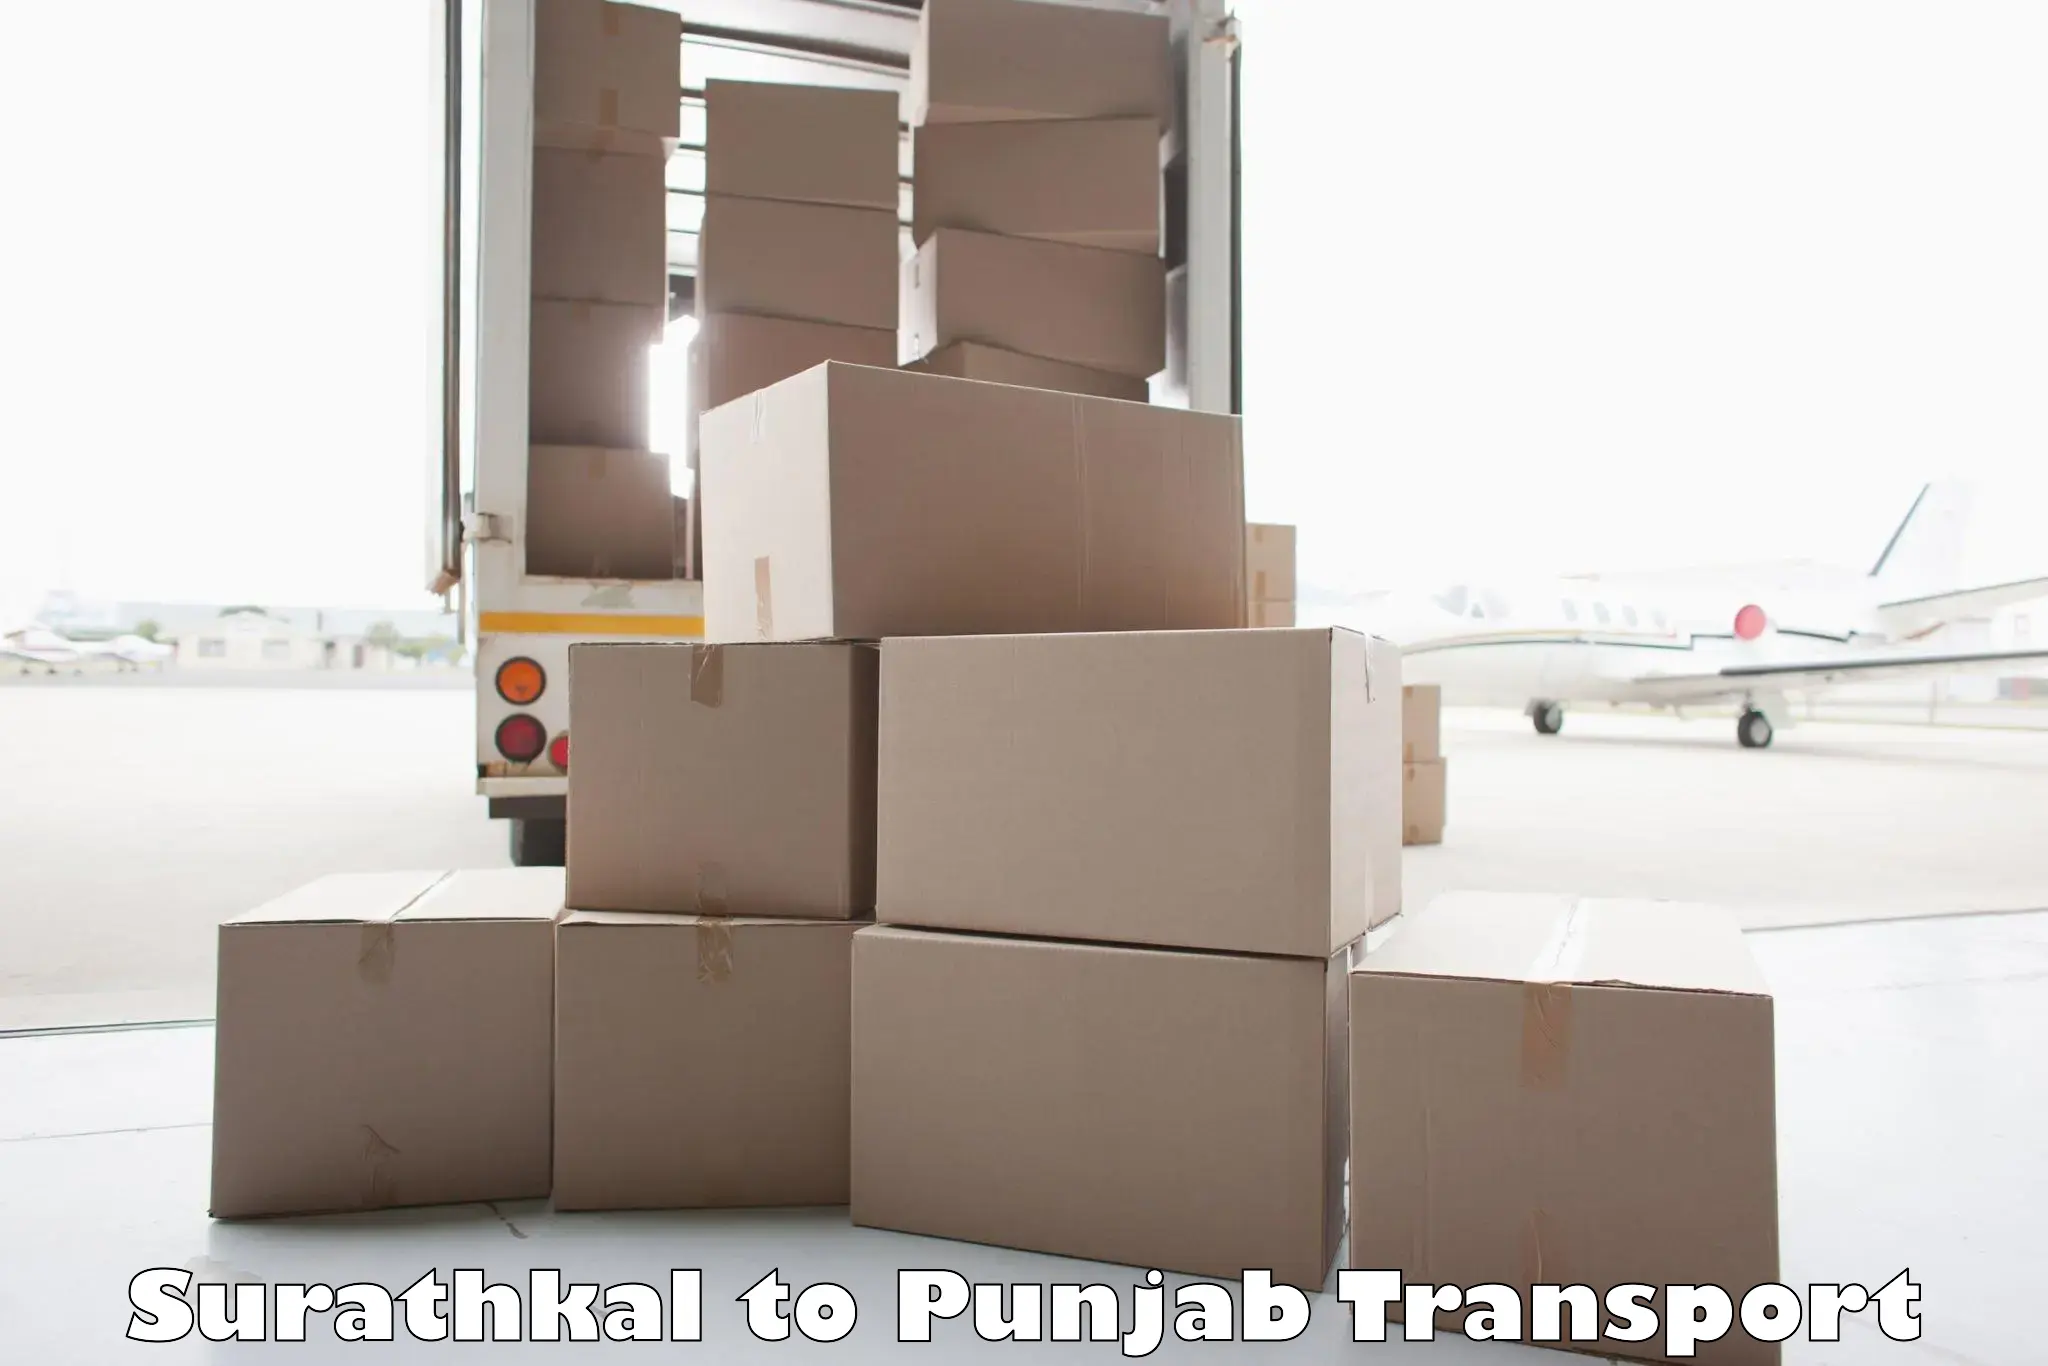 Shipping partner Surathkal to IIT Ropar